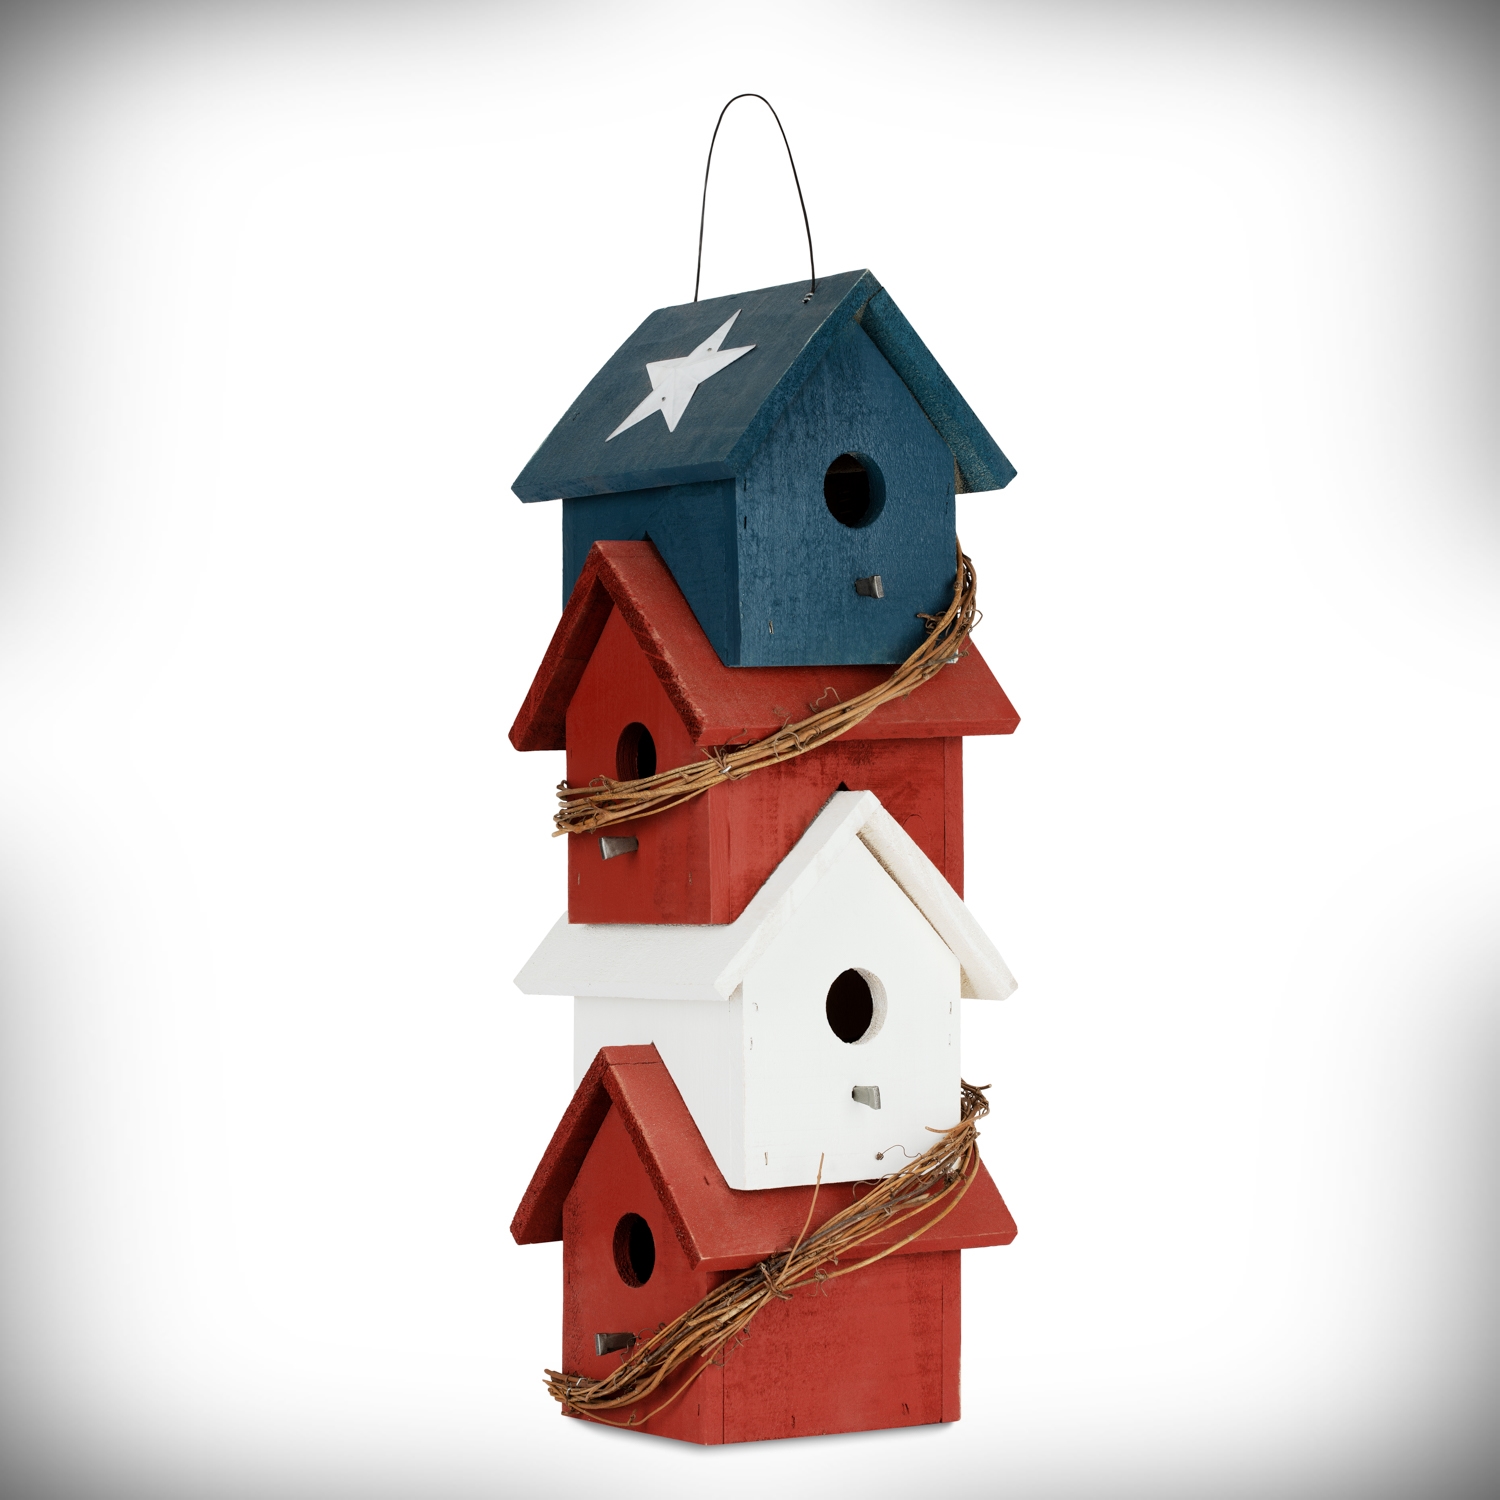 Details about   Birdhouse Patriotic Wooden Vertical Red White Stripes Tin Roof Star Opening New 